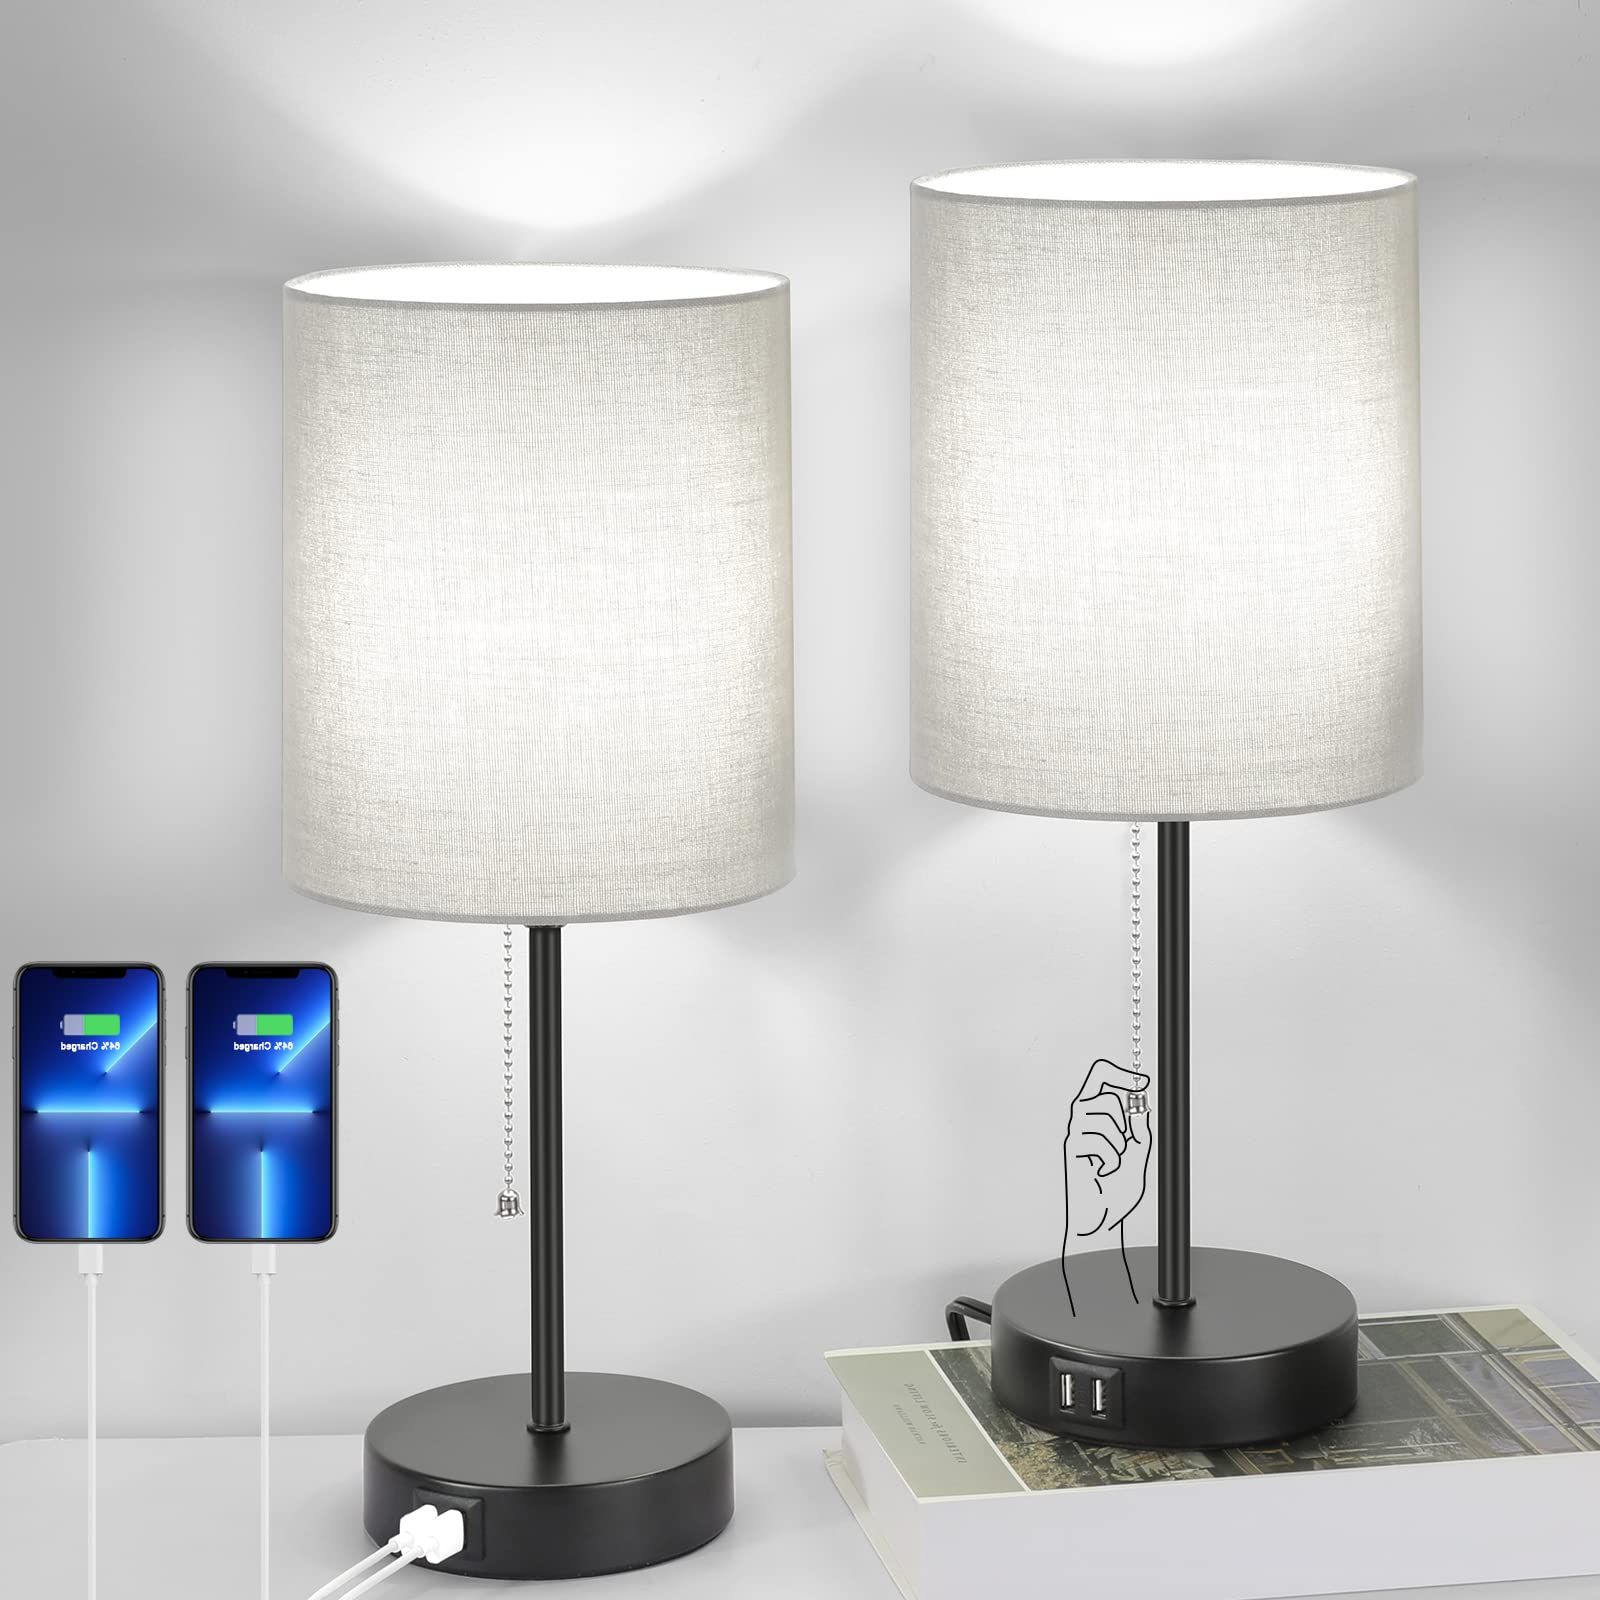 Current Standing Lamps With Usb With Regard To Table Lamps Set Of 2 With Usb Charging Ports, Grey Bedside Lamps With Ac  Outlet, Nightstand Lamps With Pull Chain Switch, Minimalist Modern Desk  Lamps With Fabric Shade For Living Room Bedroom (View 4 of 10)